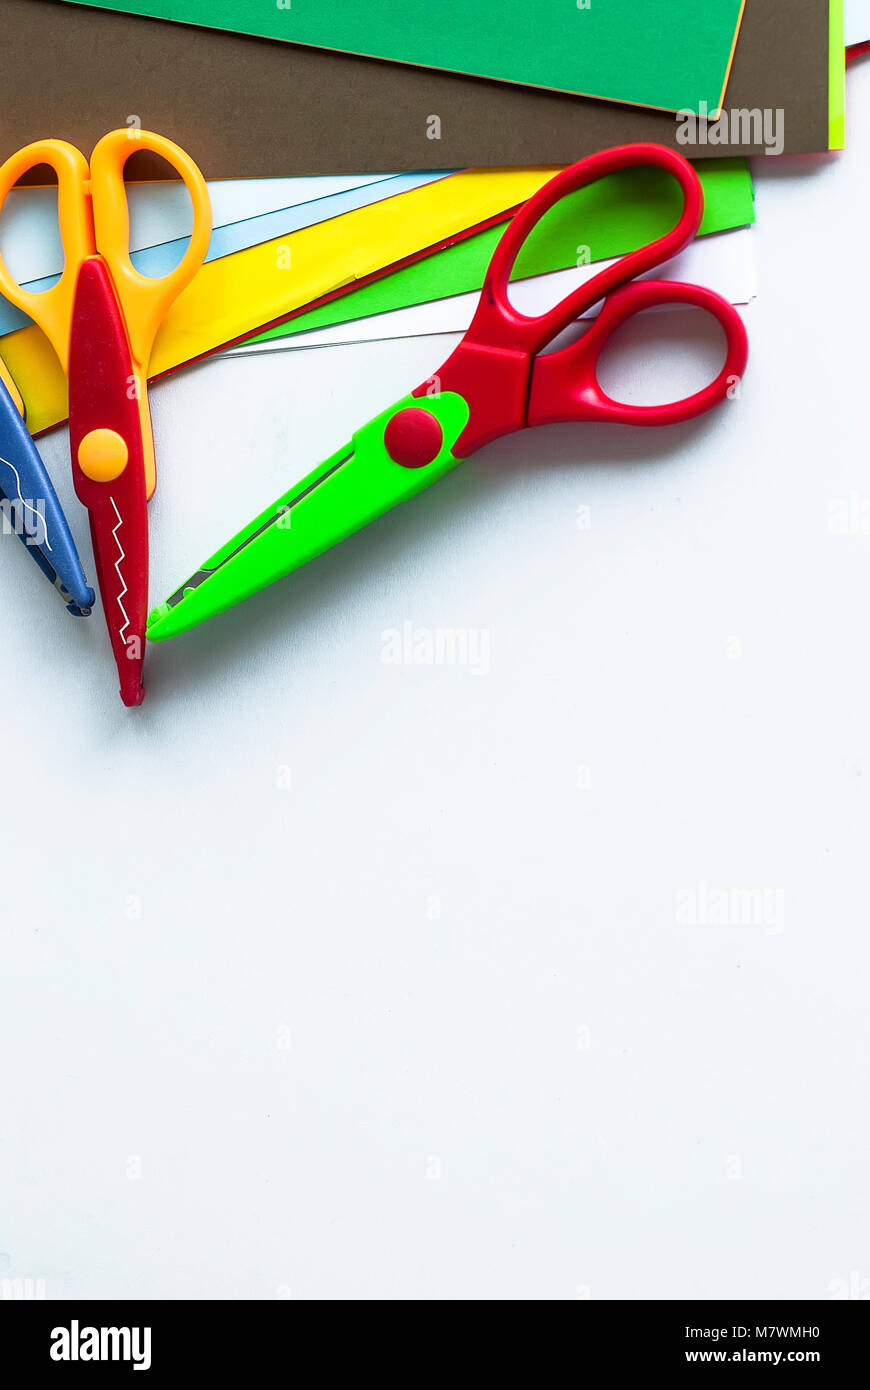 curly scissors and colored sheets of paper for scrapbook classes on a white  table. children's stationery creative tools. Creativity concept Stock Photo  - Alamy